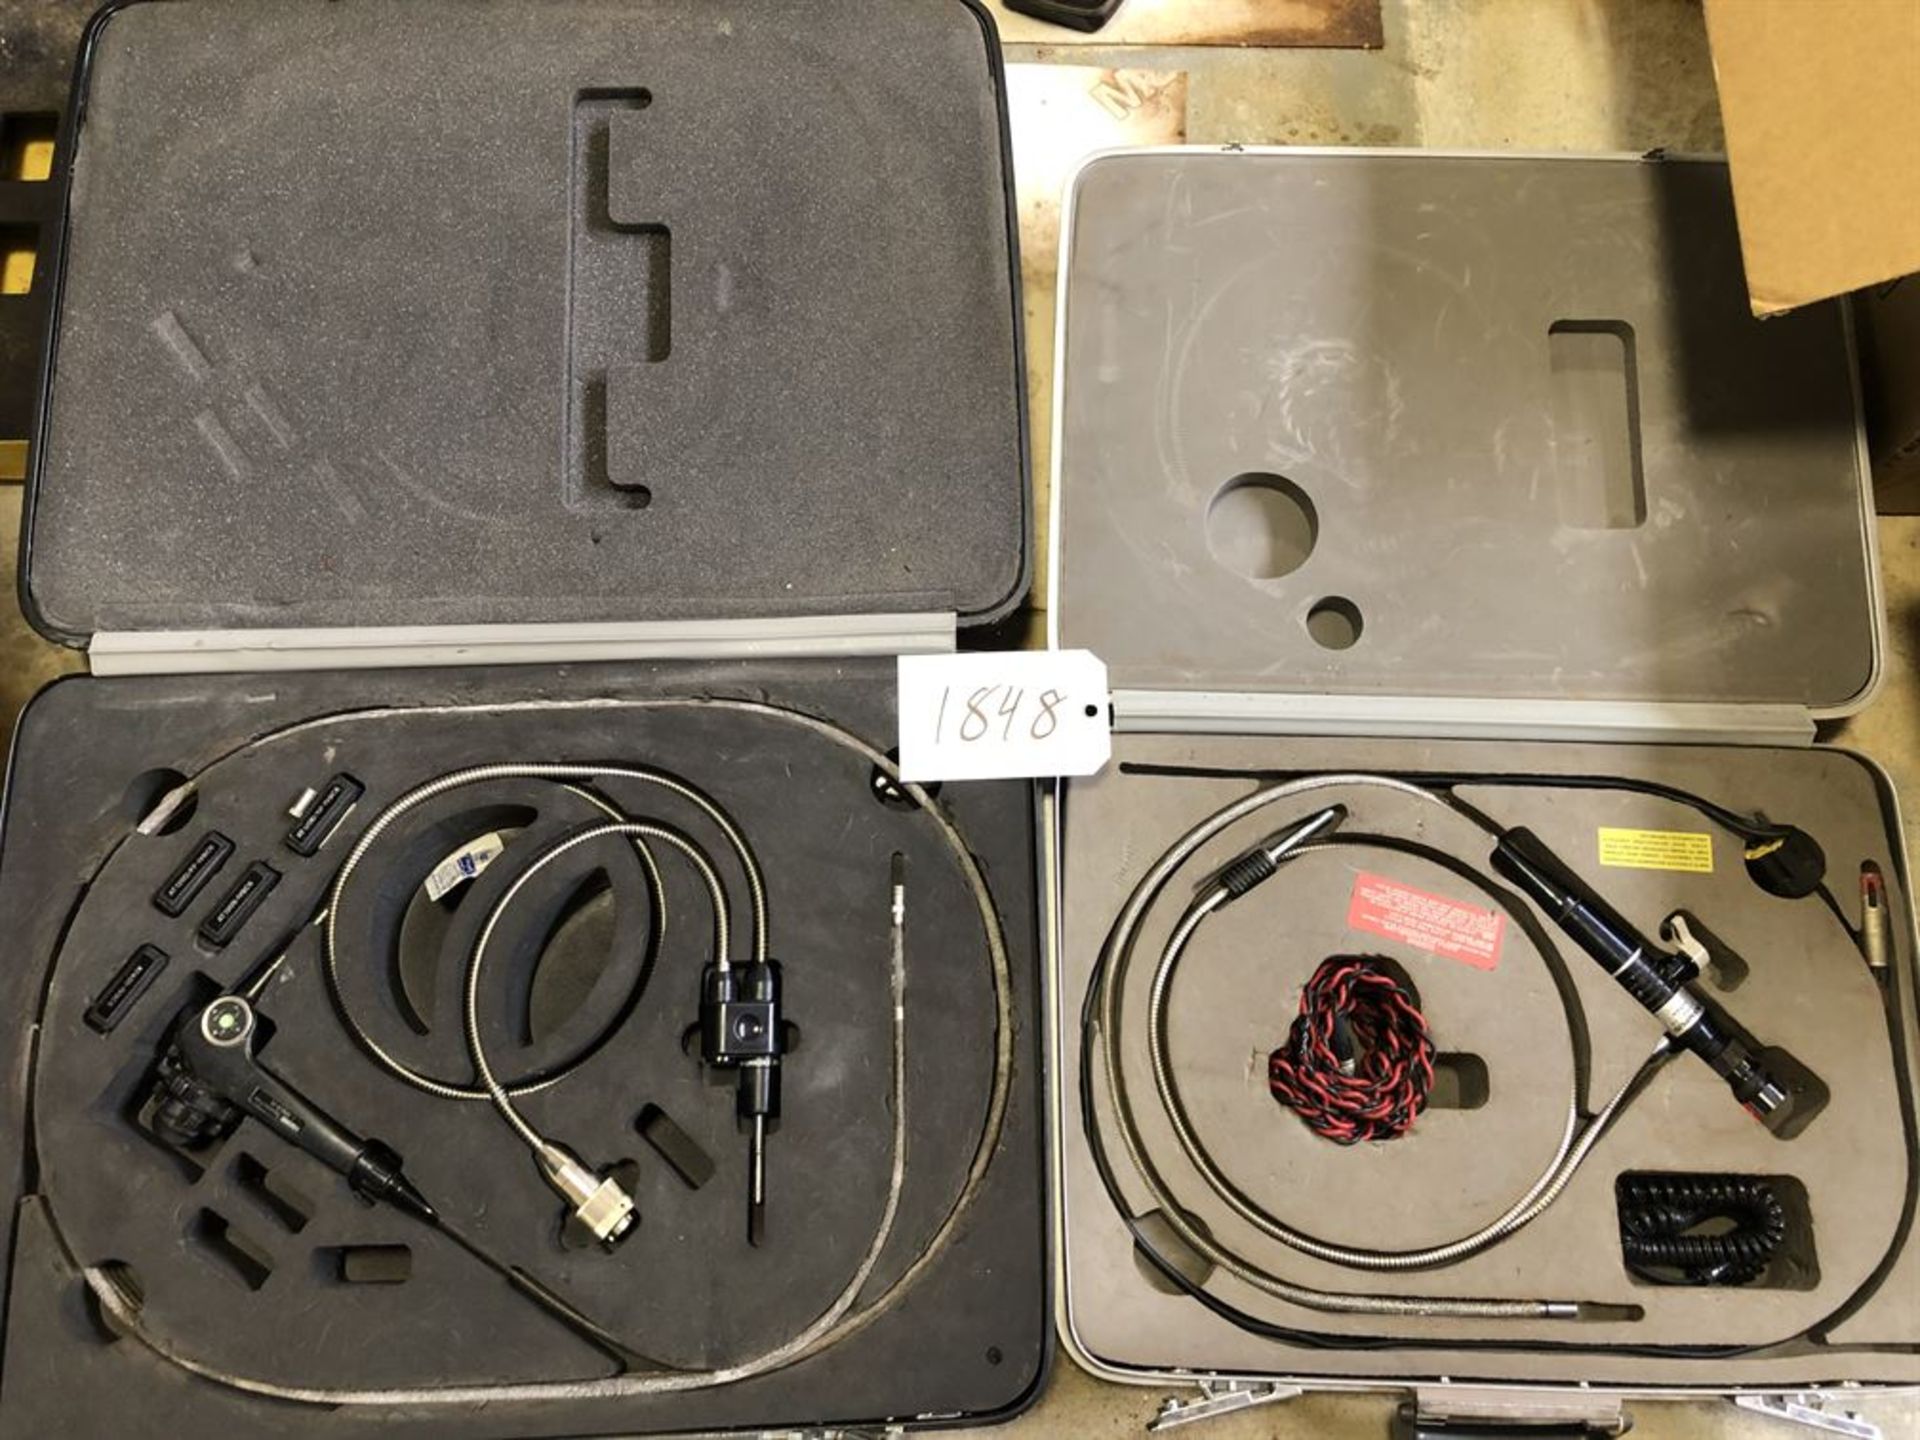 Lot Comprising of (1) OLYMPUS IF11D2-10 Endoscope, and (1) OLYMPUS IV8C6-75 Tapered Flex